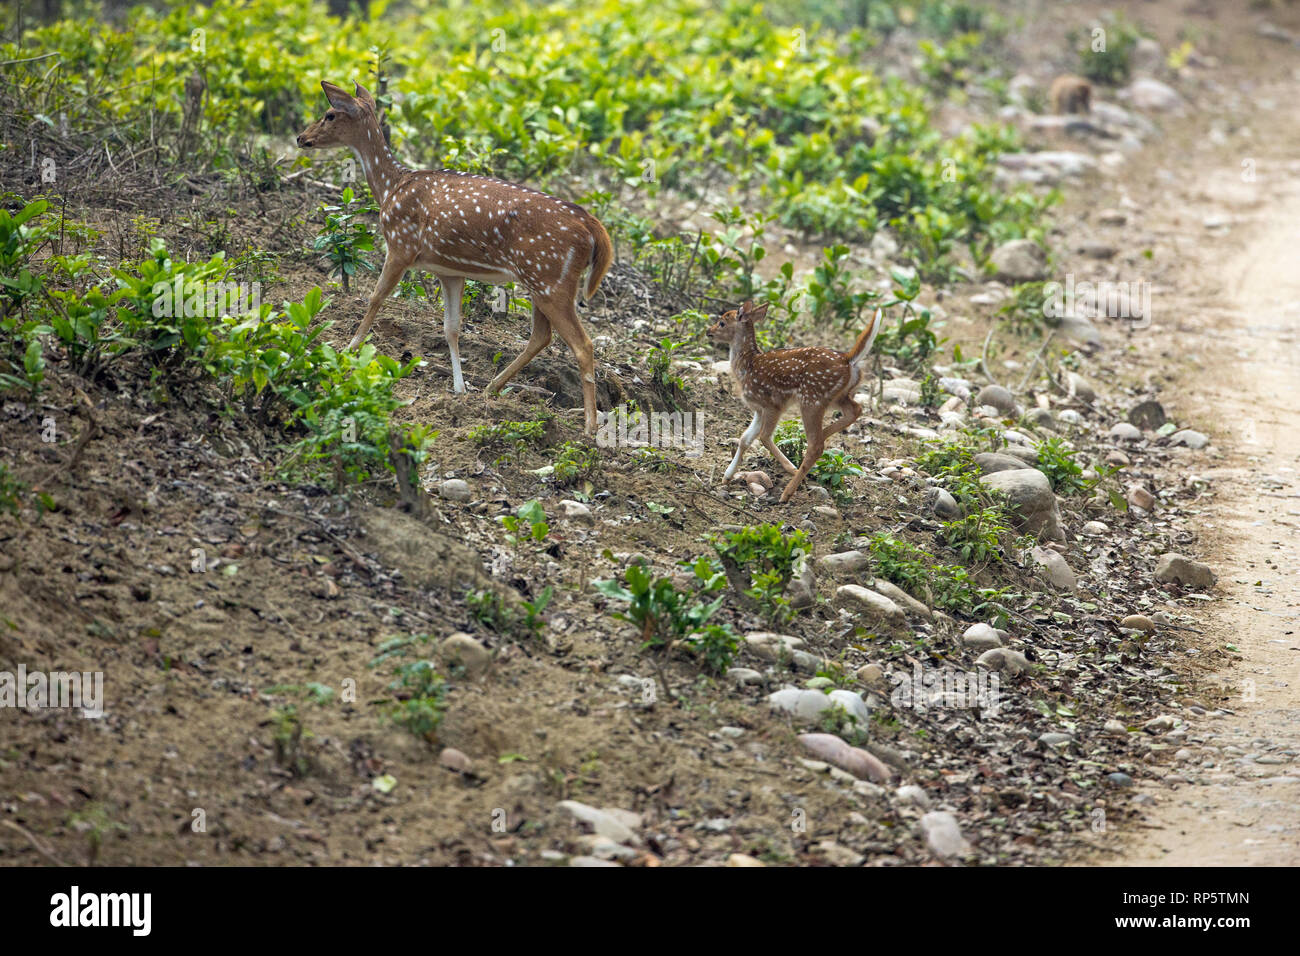 Chital deer (Axis axis). Spotted Deer, Female, mother, dam, leading, followed by, young, precocial fawn. January. Corbett National Park. Northern India. Stock Photo